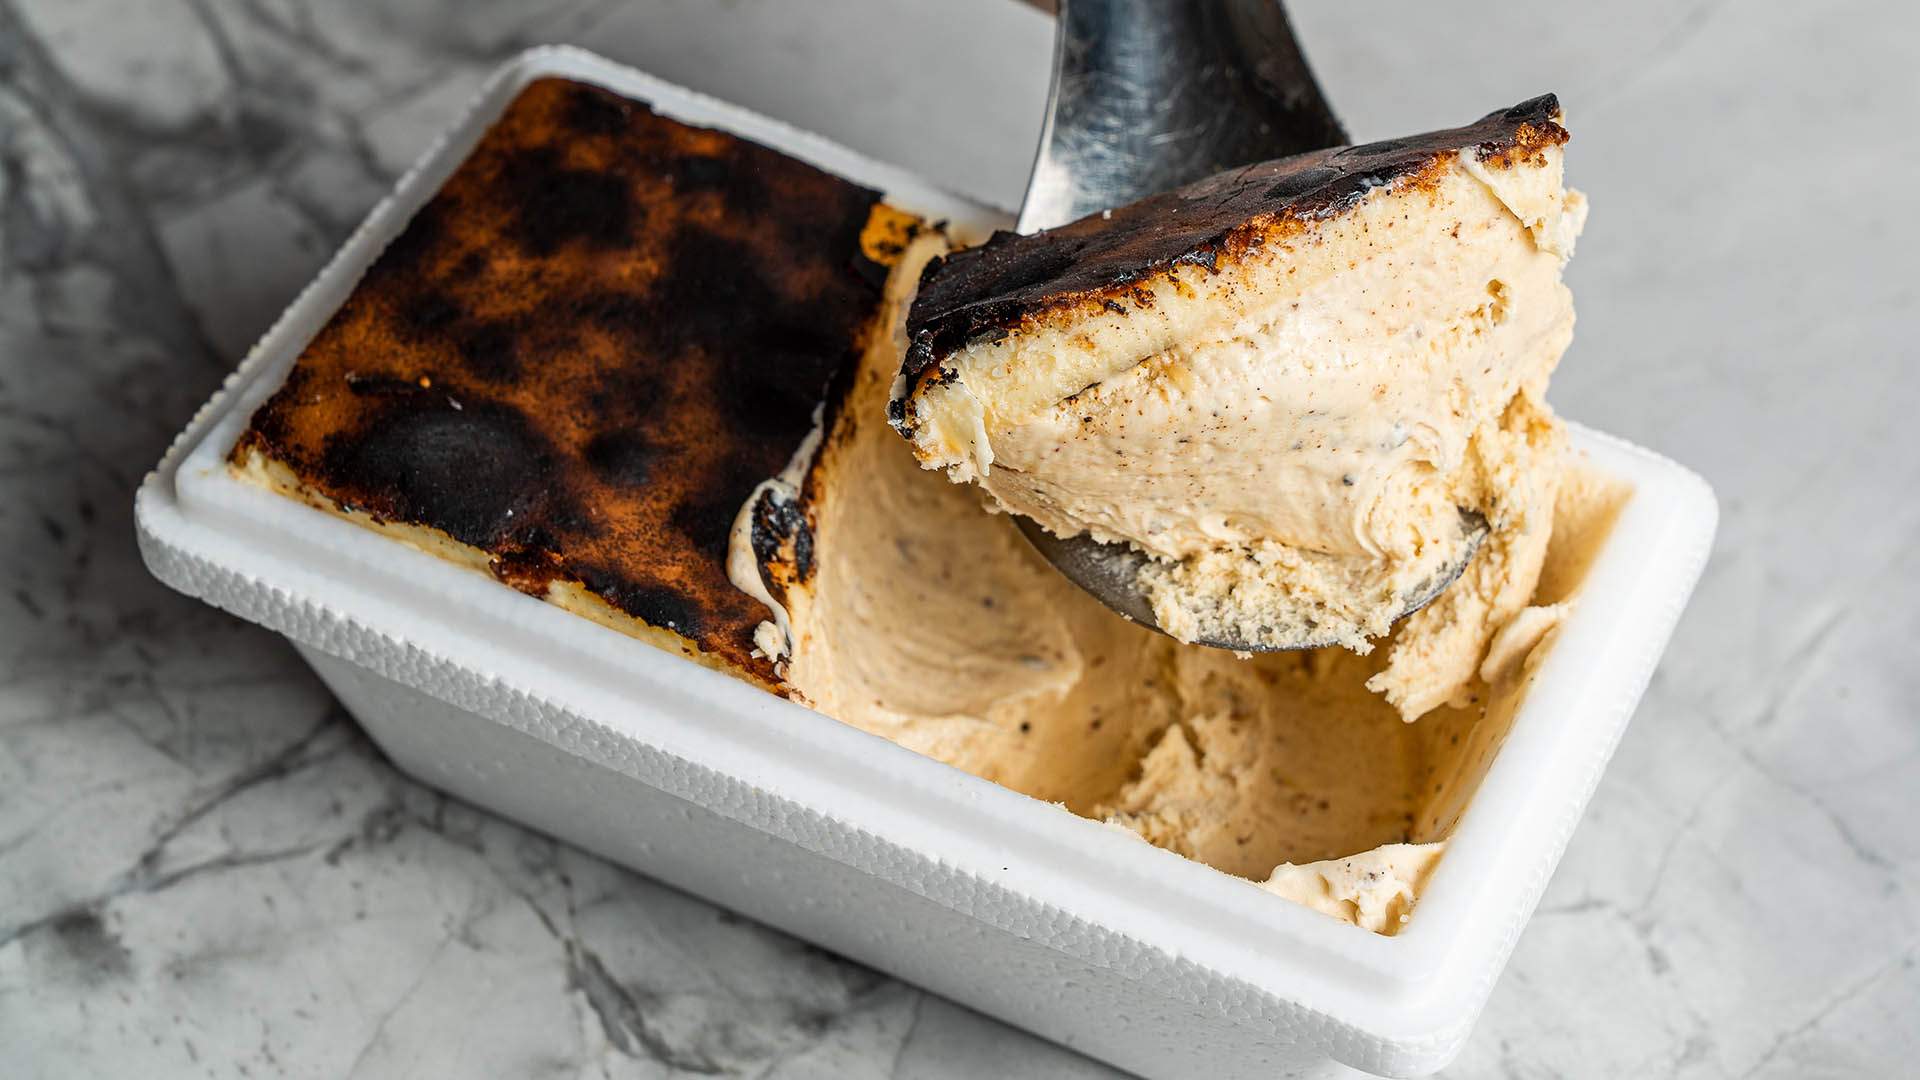 Messina Is Bringing Back Its Limited-Edition Tubs of Basque Cheesecake-Topped Gelato